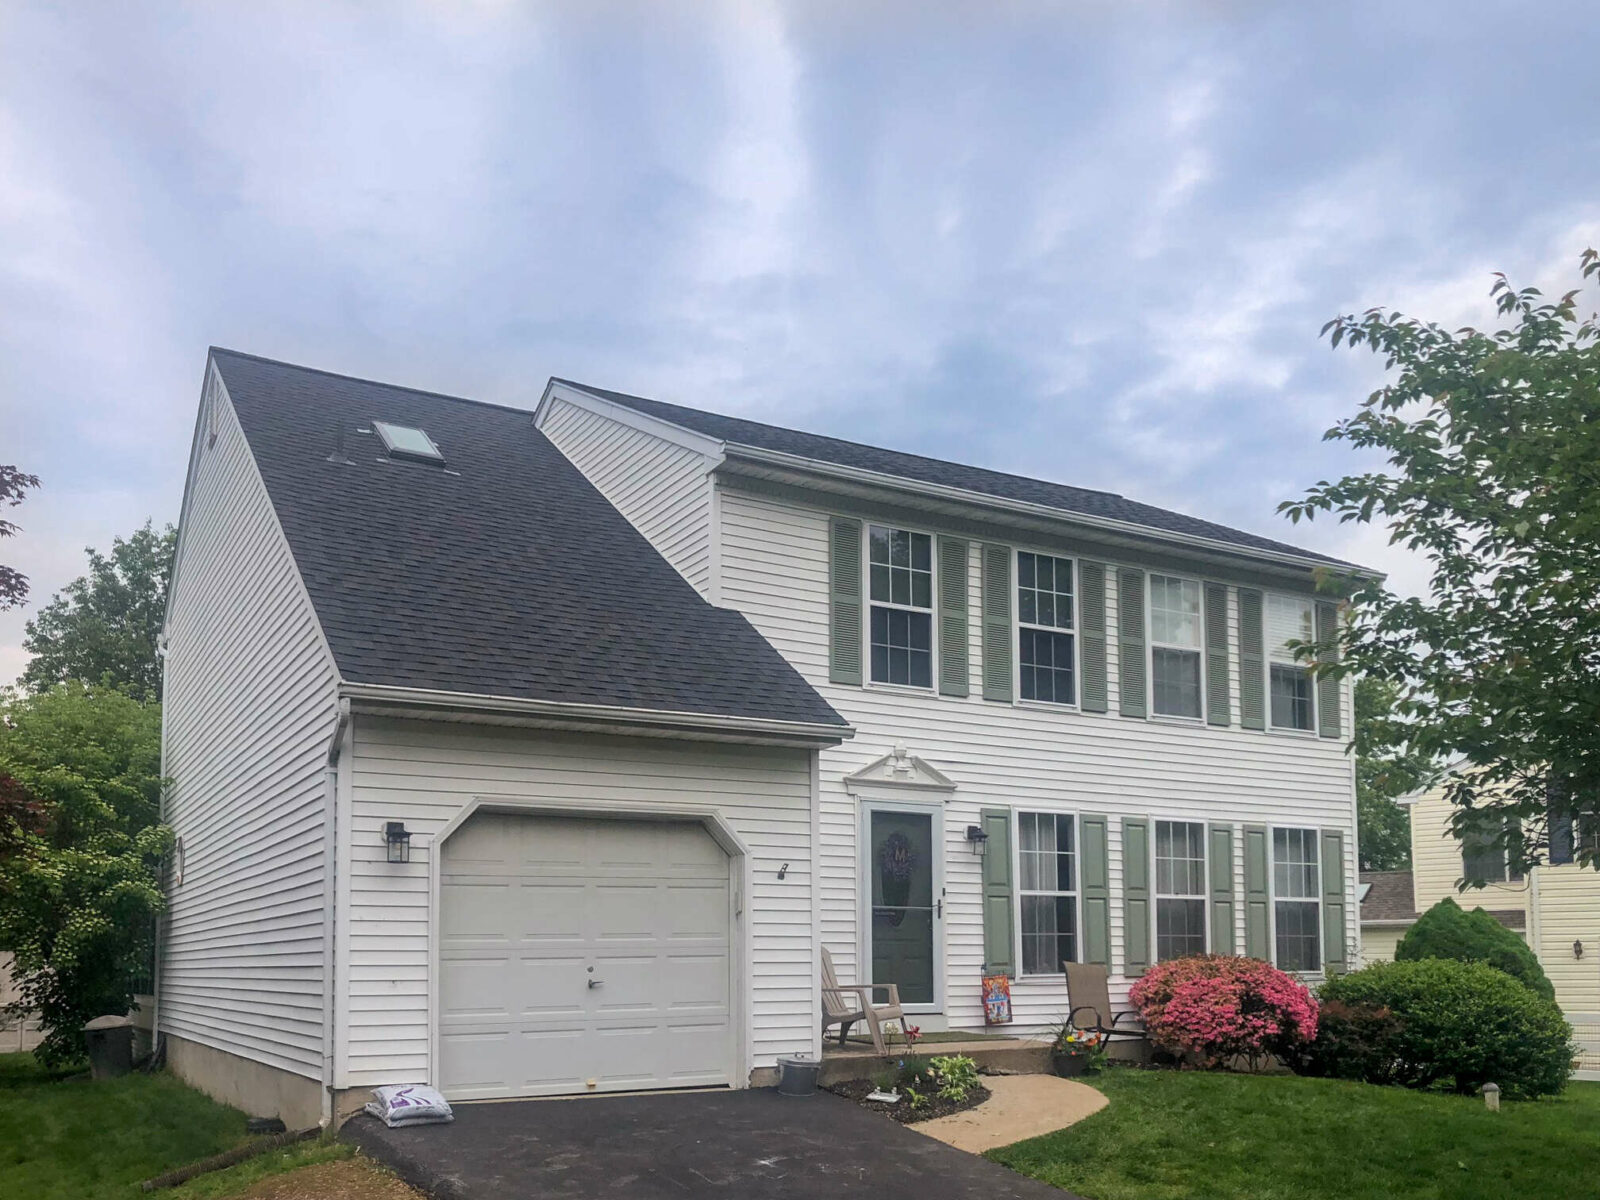 New siding in Royersford, PA